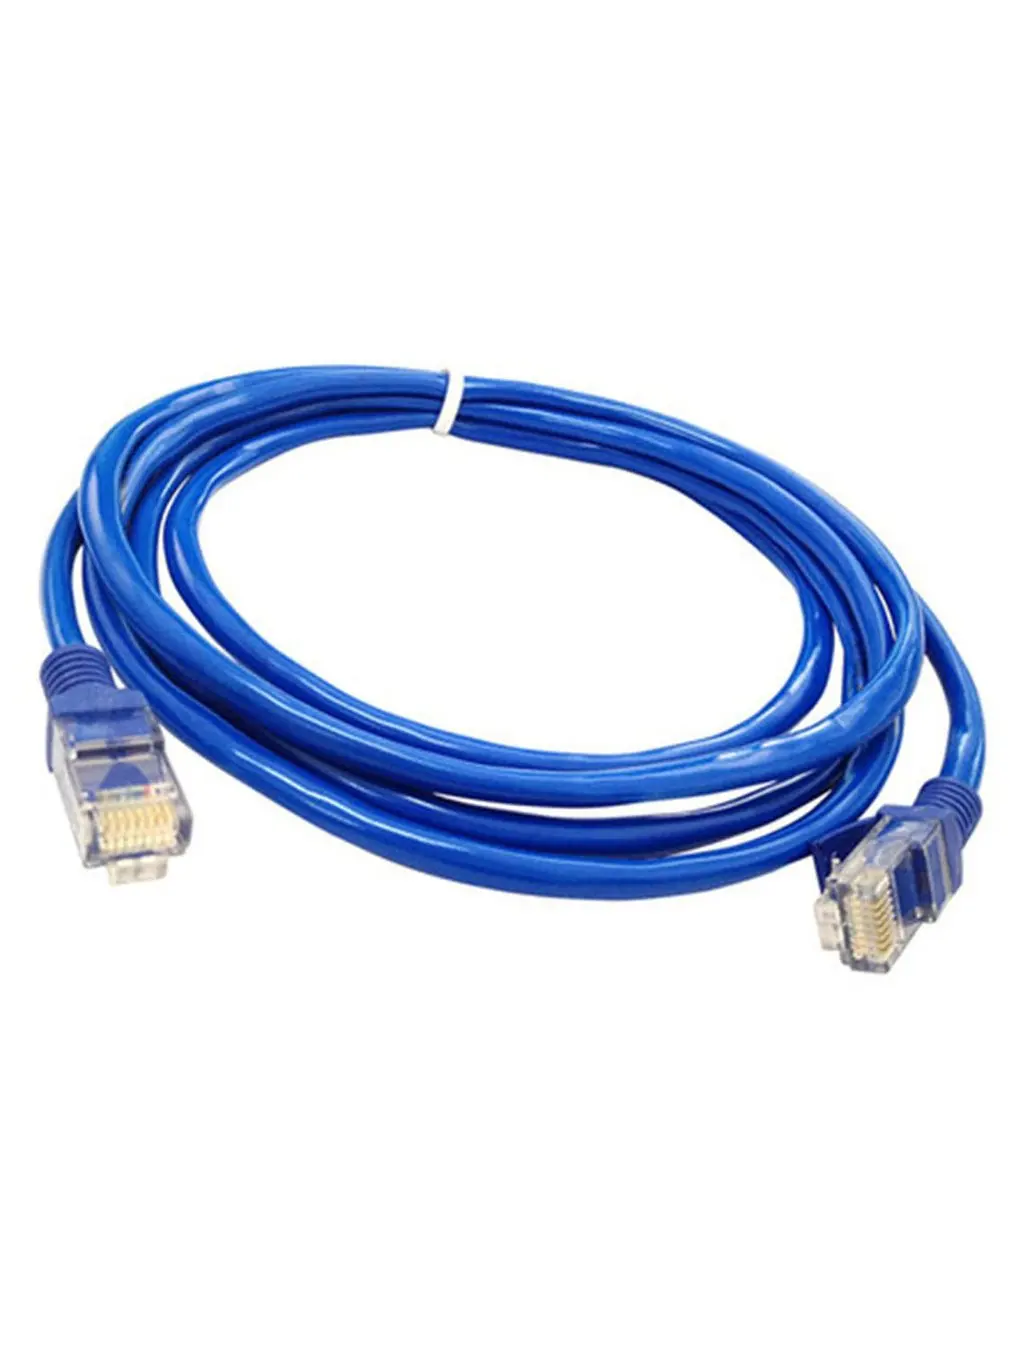 S926d178544334d3181e9d55824c74f823 1m 2m 3m 5m 10m 20m cat 5 CAT5E Flat UTP Ethernet Network Cable RJ45 Patch LAN cable For Computer Laptop